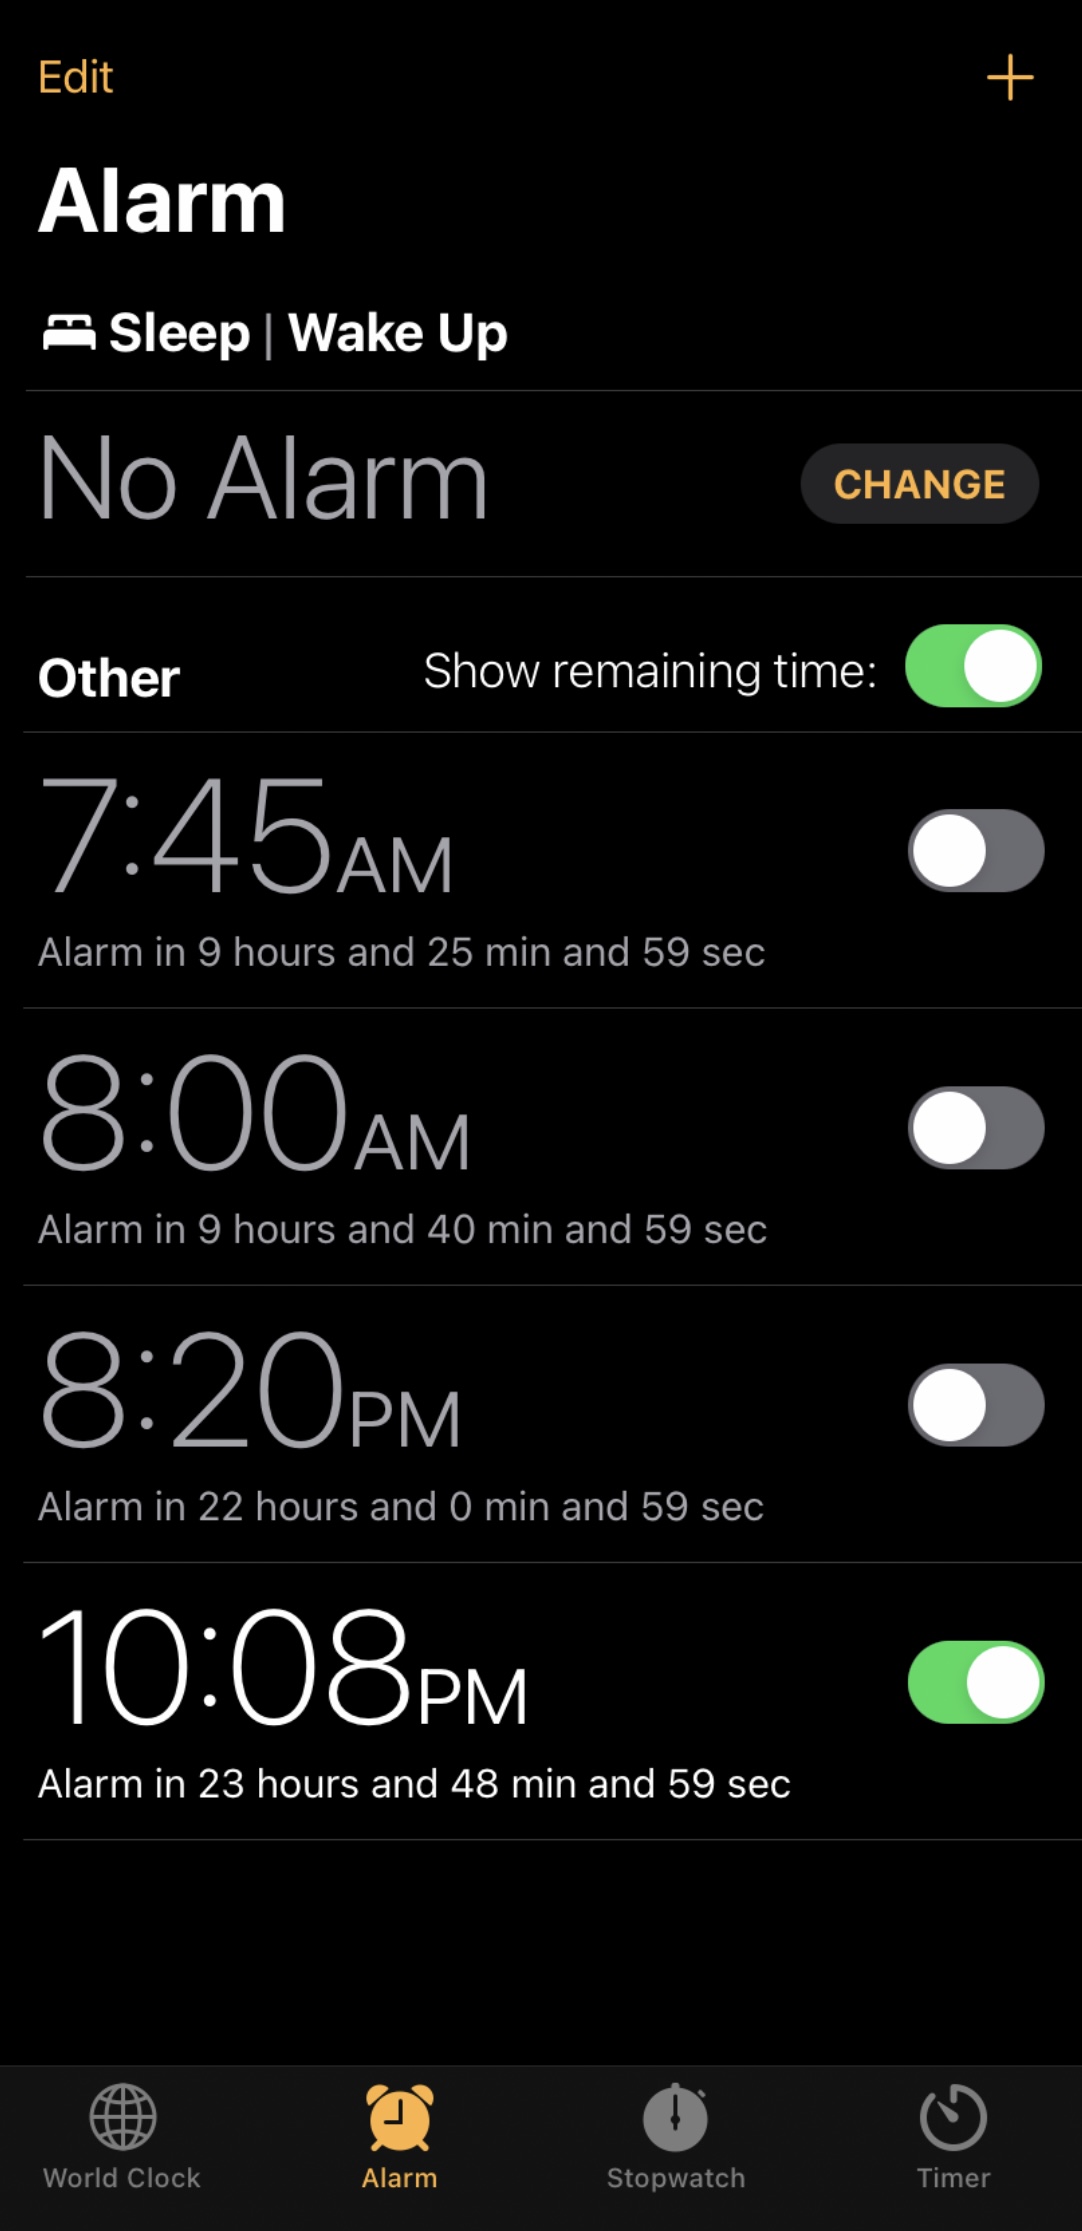 ClockPlus shows how much time remains before pending alarms will fire.